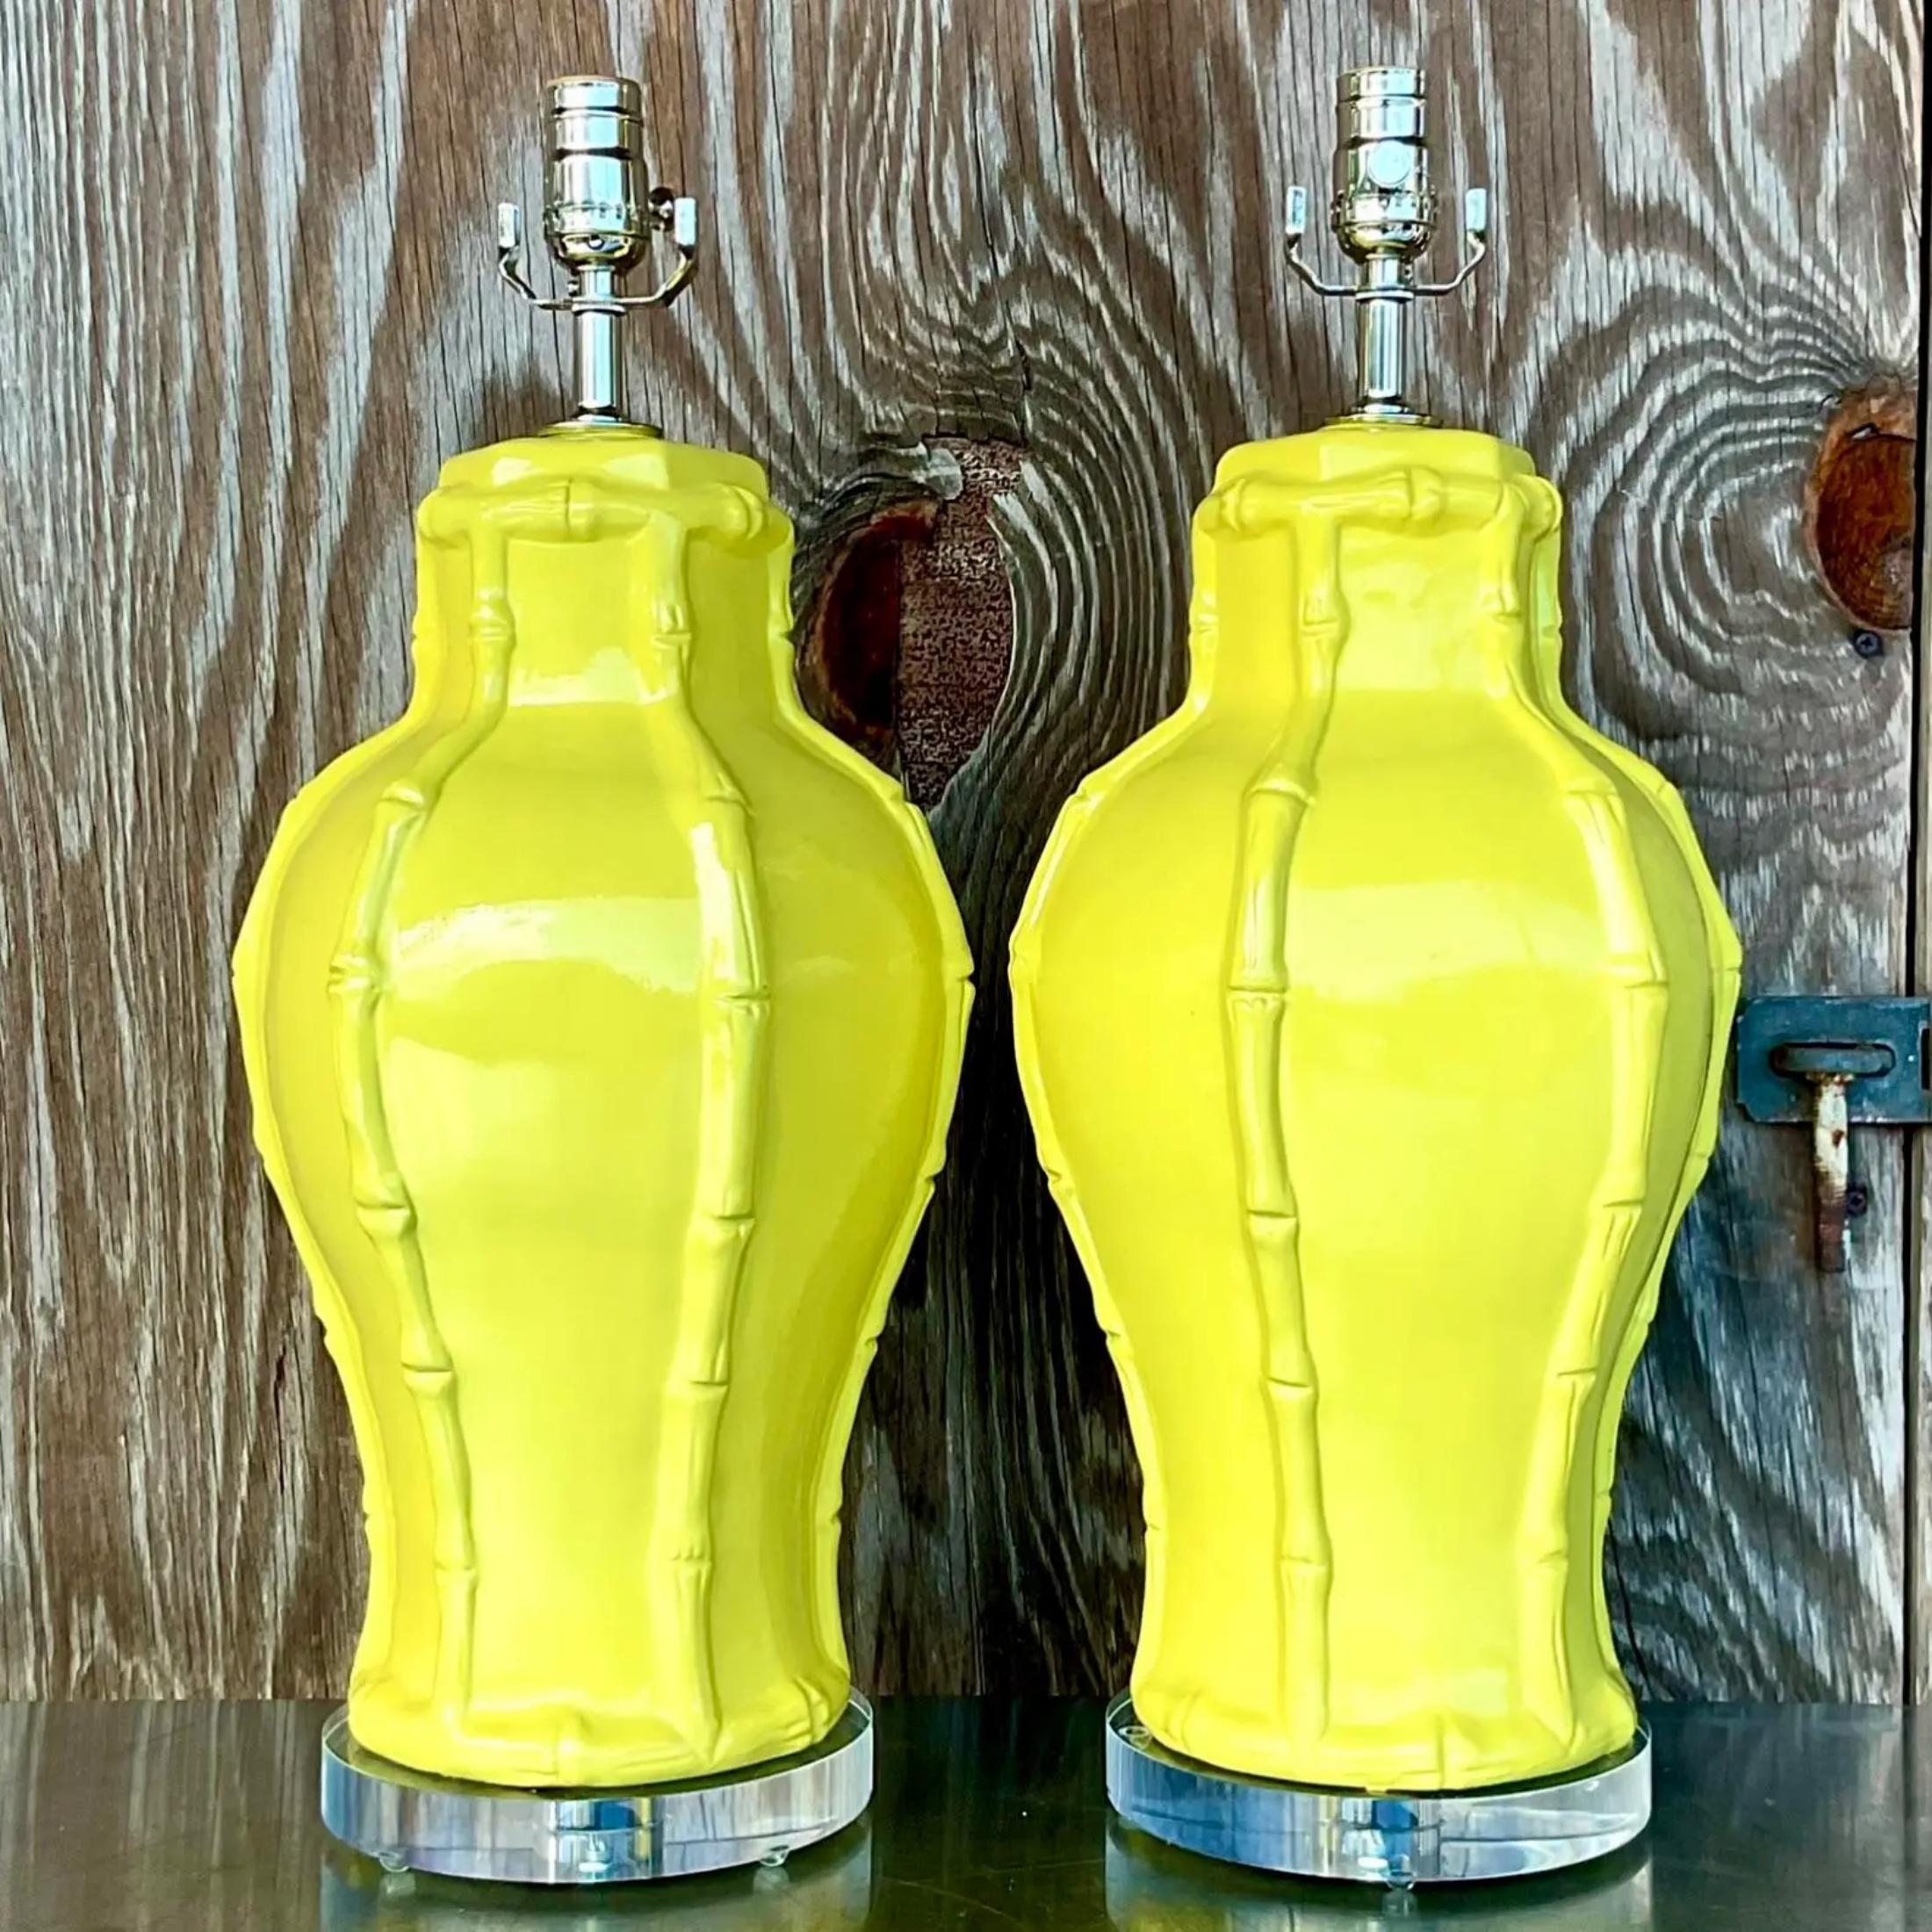 Vintage Coastal Chartreuse Bamboo Lamps - a Pair For Sale 3